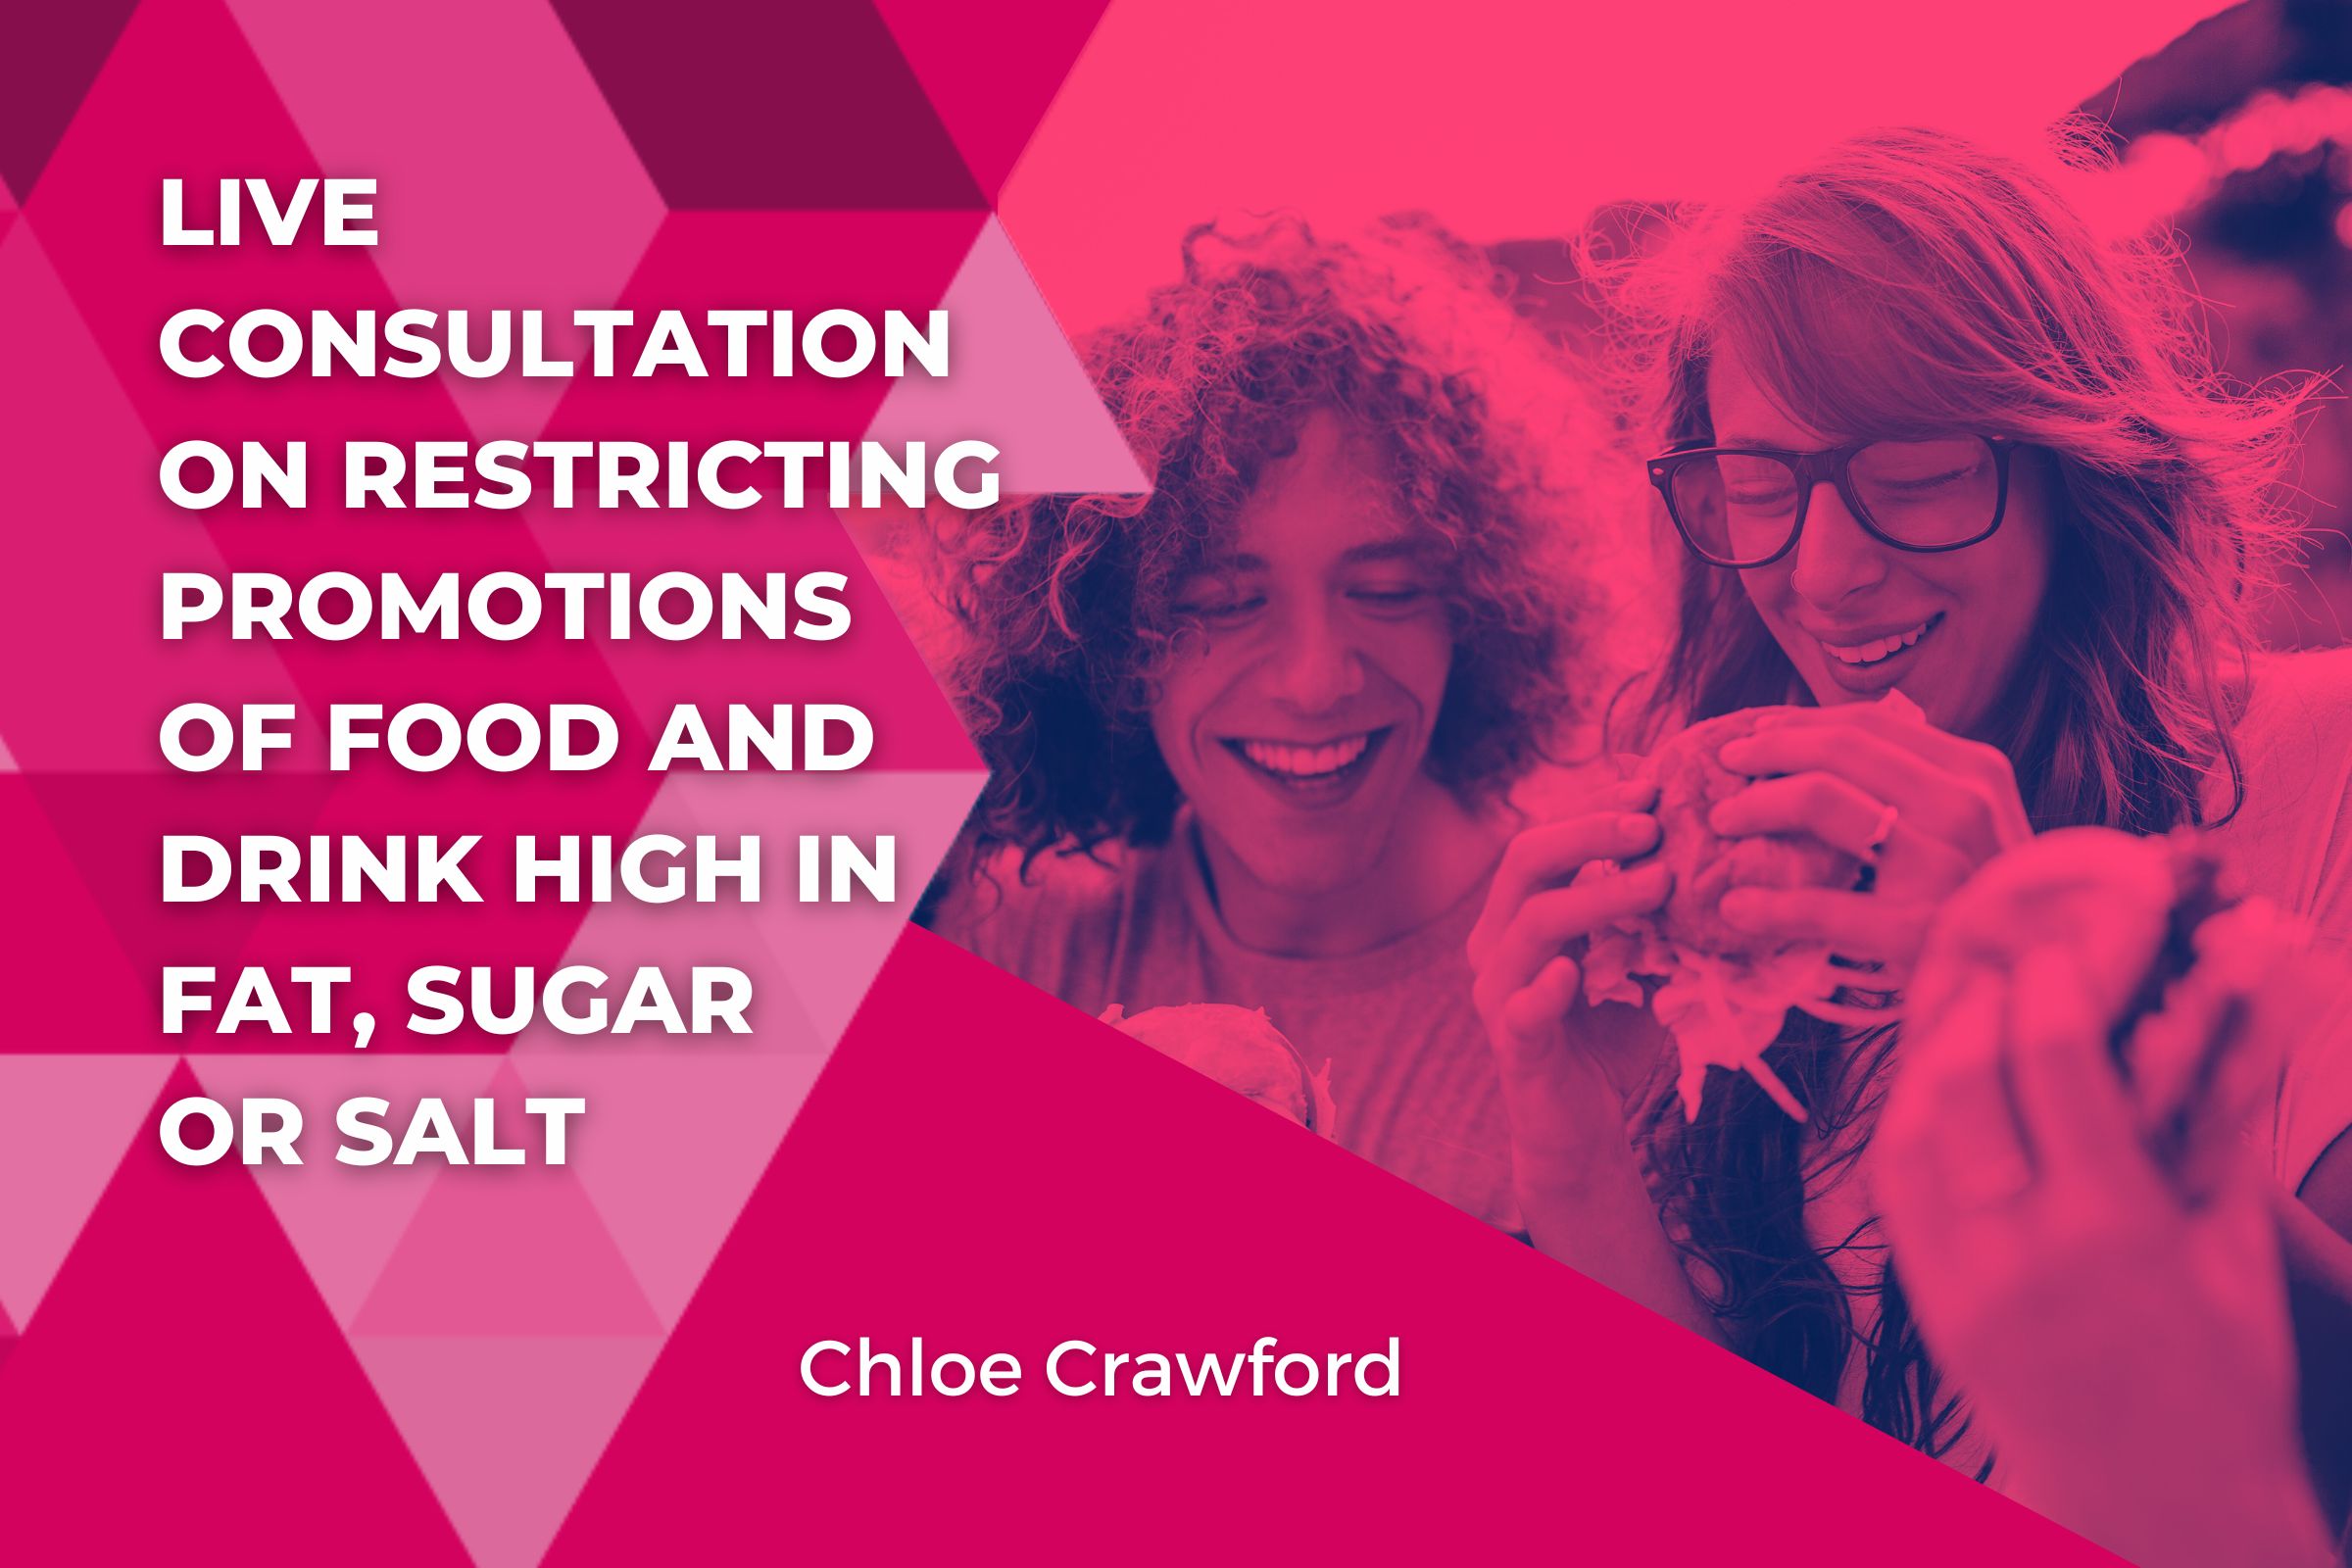 Live Consultation on restricting promotions of food and drink high in fat sugar or salt